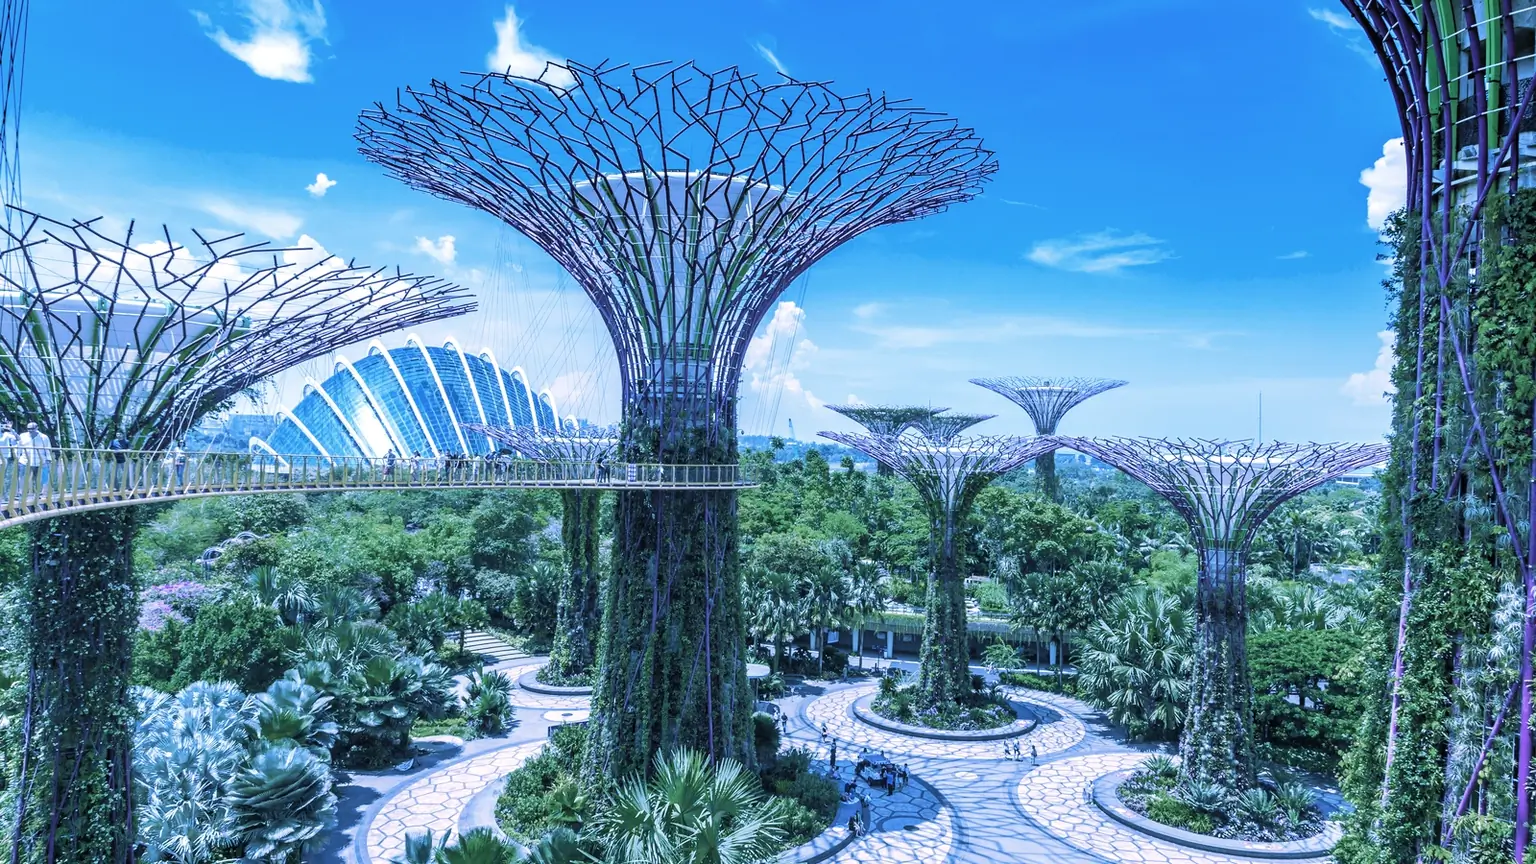 Gardens by the Bay, near Marina Bay Sands hotel in Singapore. Image: Shutterstock